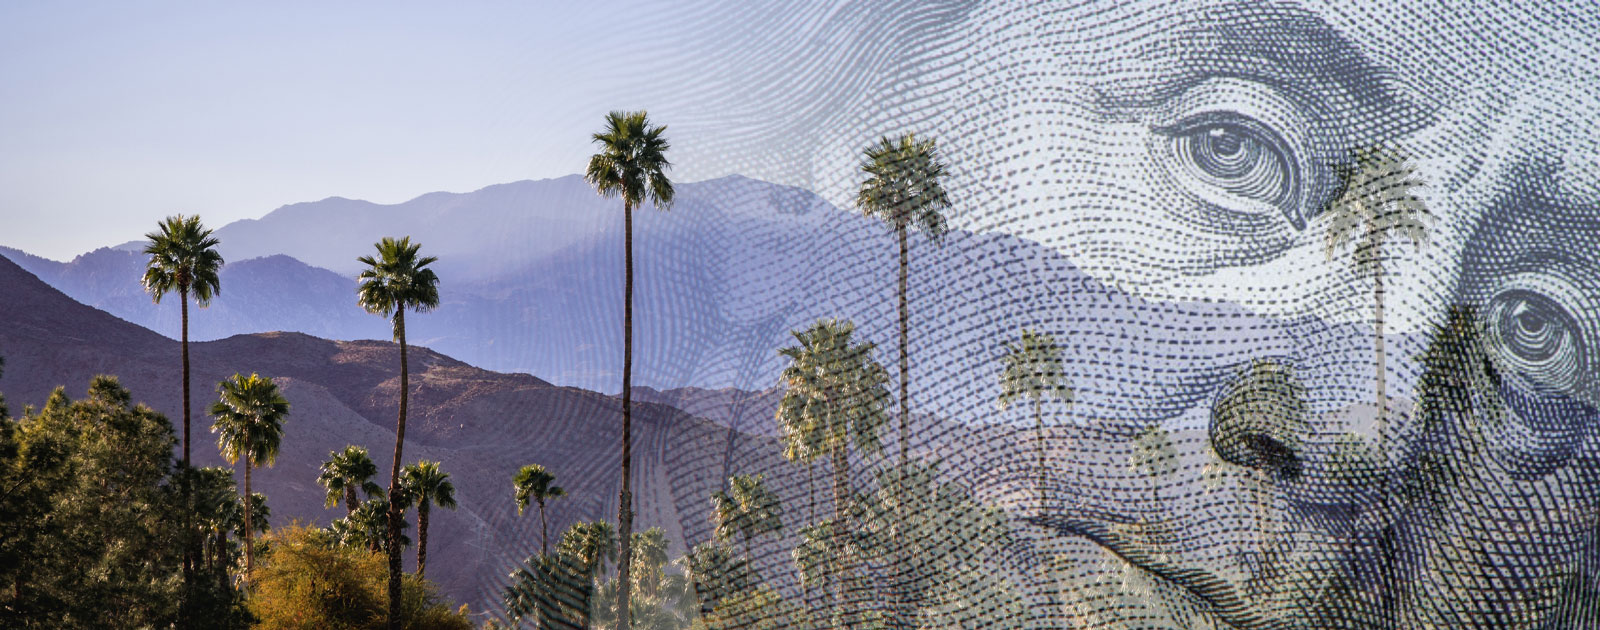 palm trees and mountains with an image of money overlaid